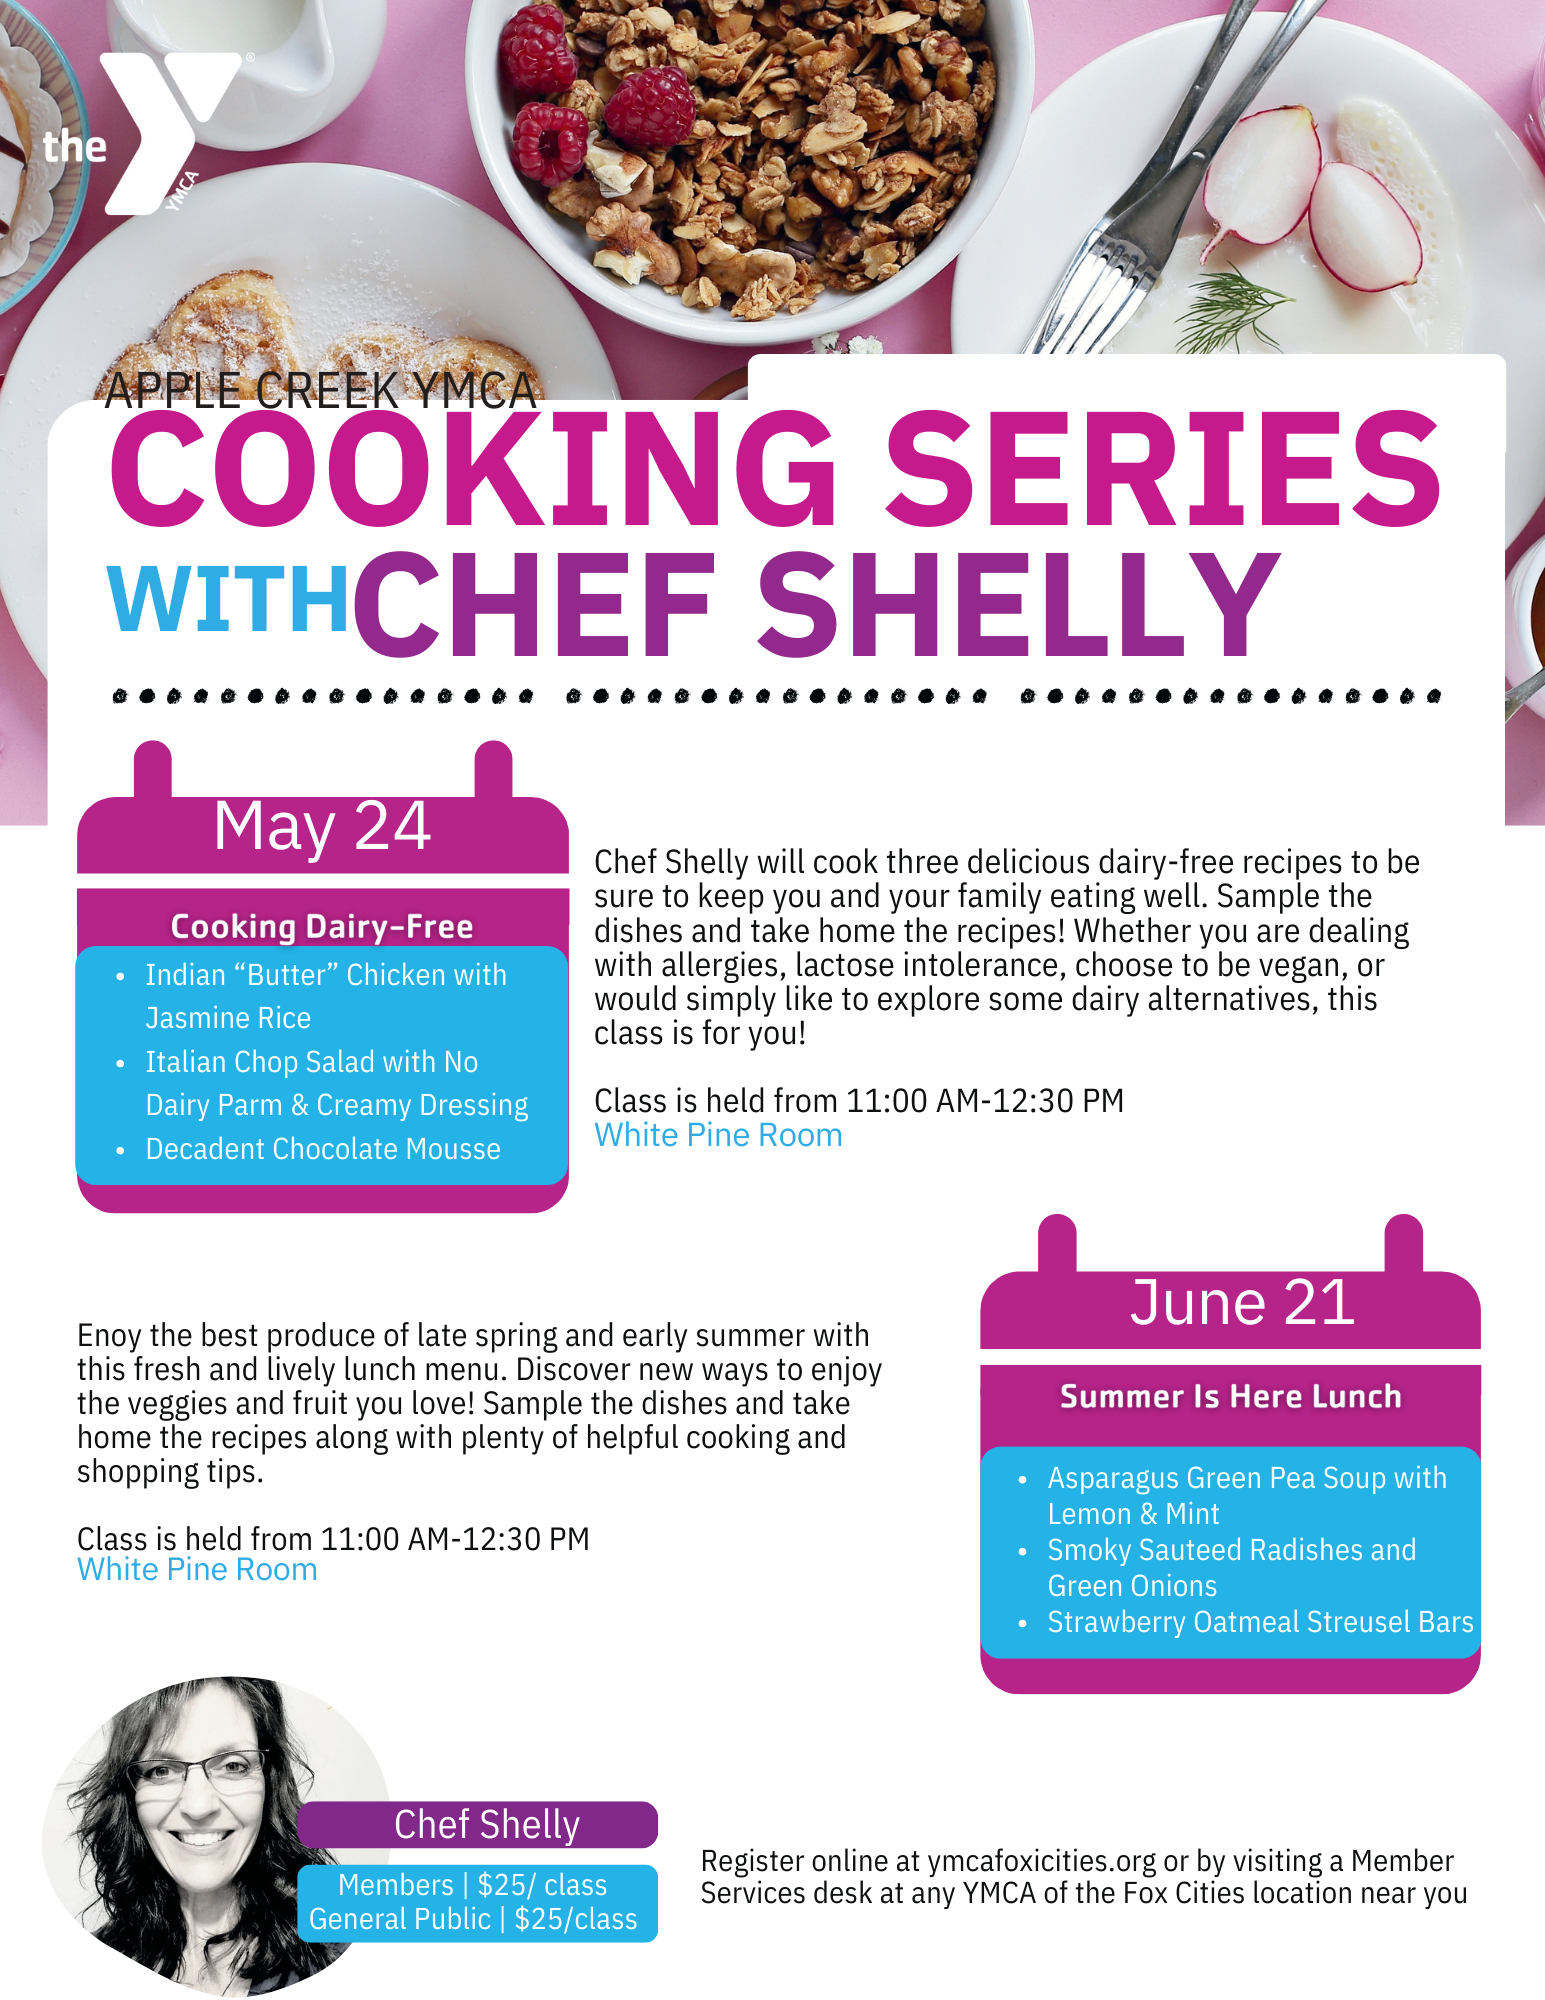 A flyer for a cooking series with chef shelly